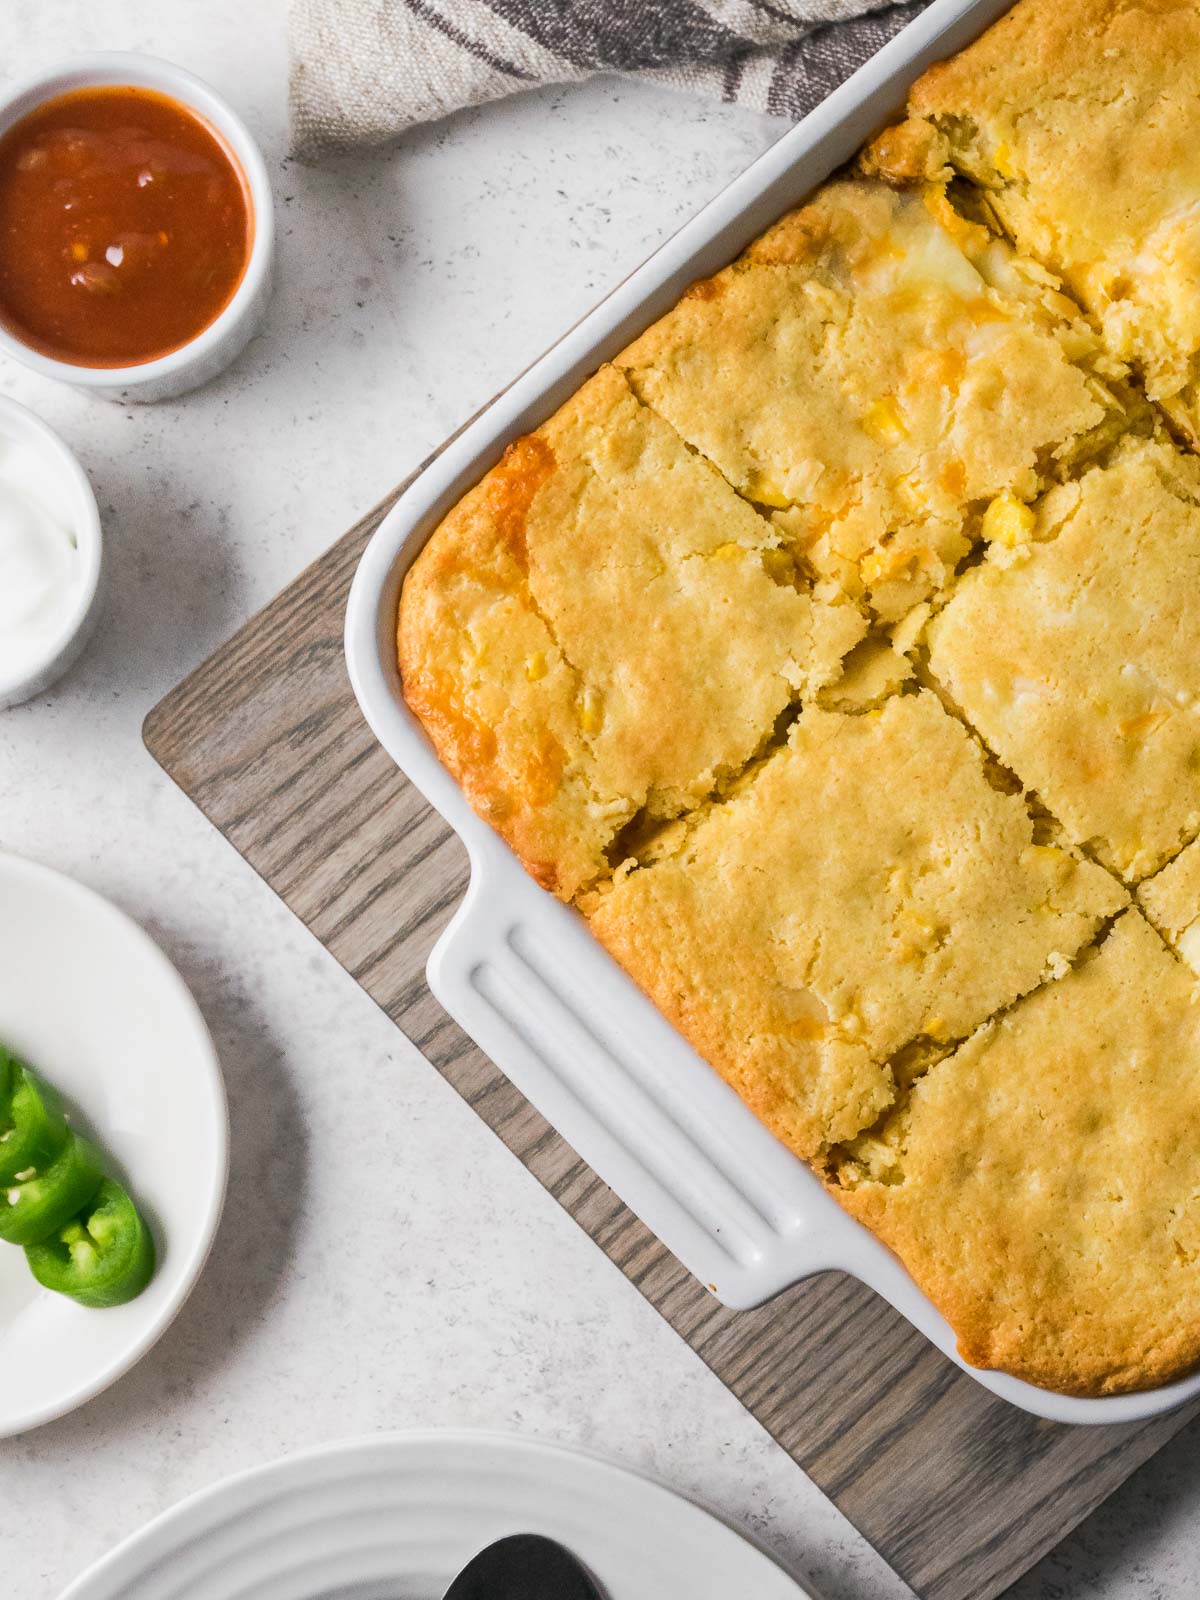 A dish of Mexican cornbread casserole cut into slices and ready to serve.